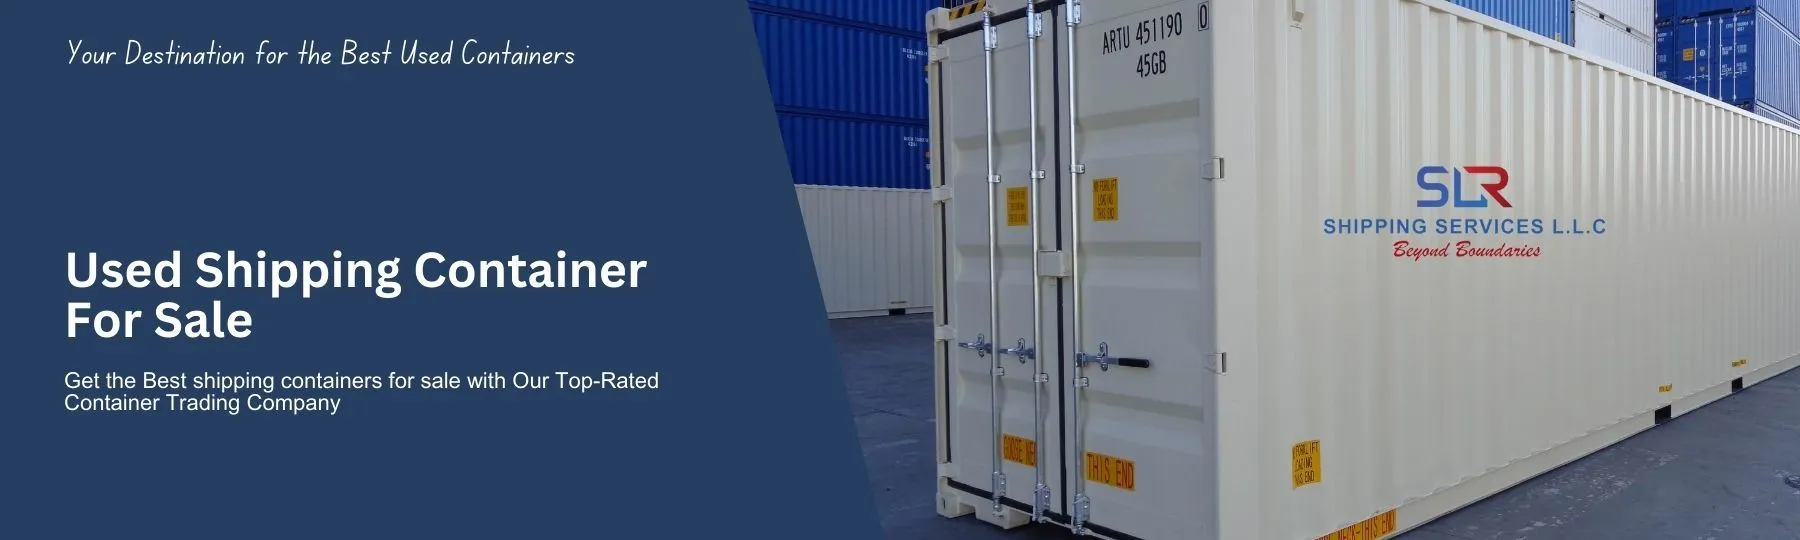 Used Shipping Container for Sale – Container Transport